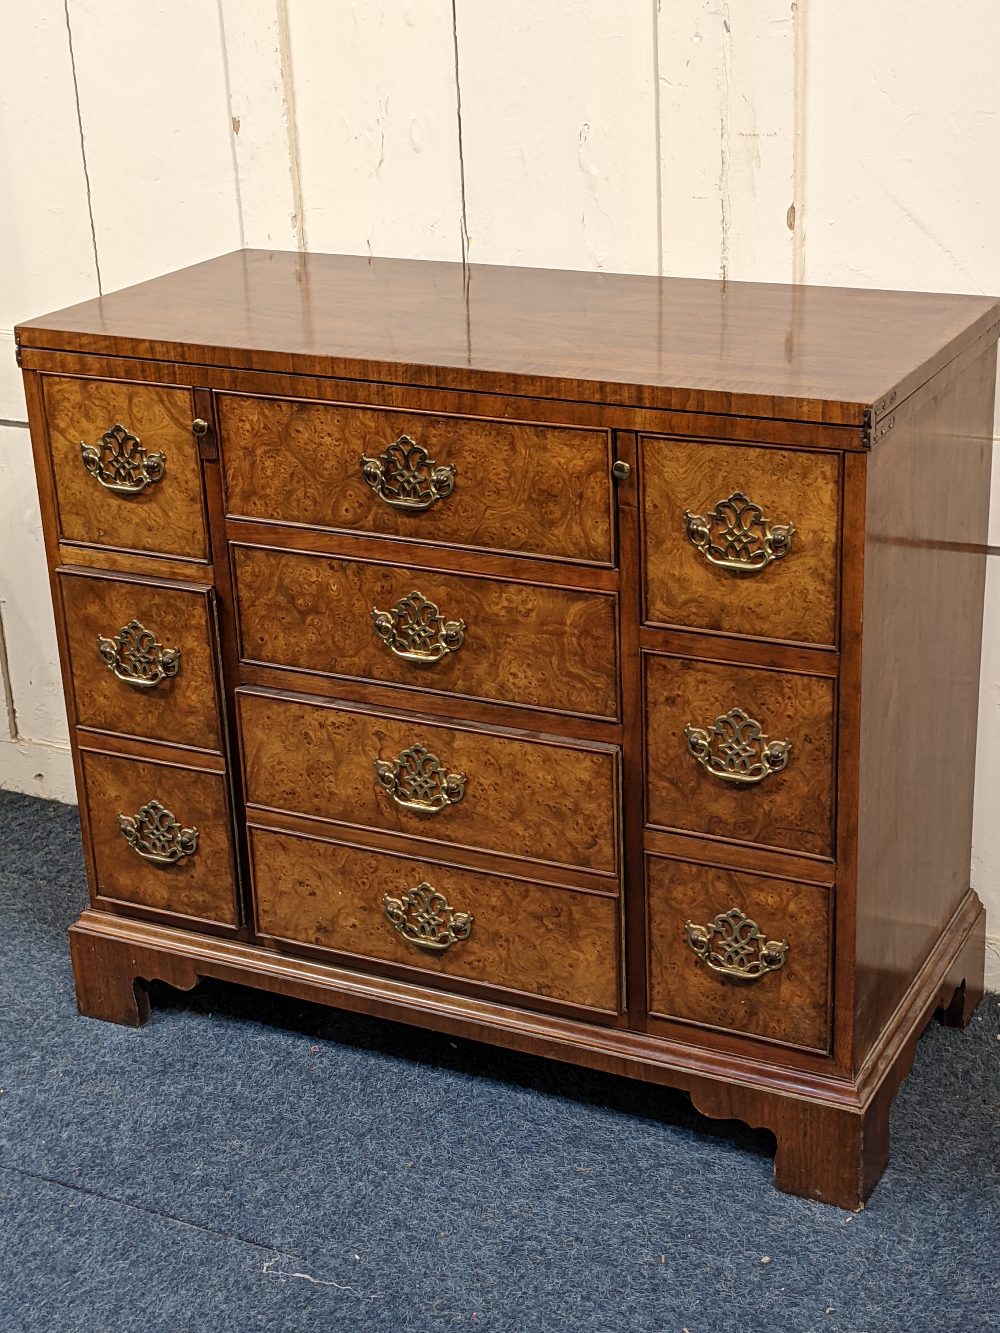 An American Baker Furniture reproduction bachelor chest with rectangular fold over top above an